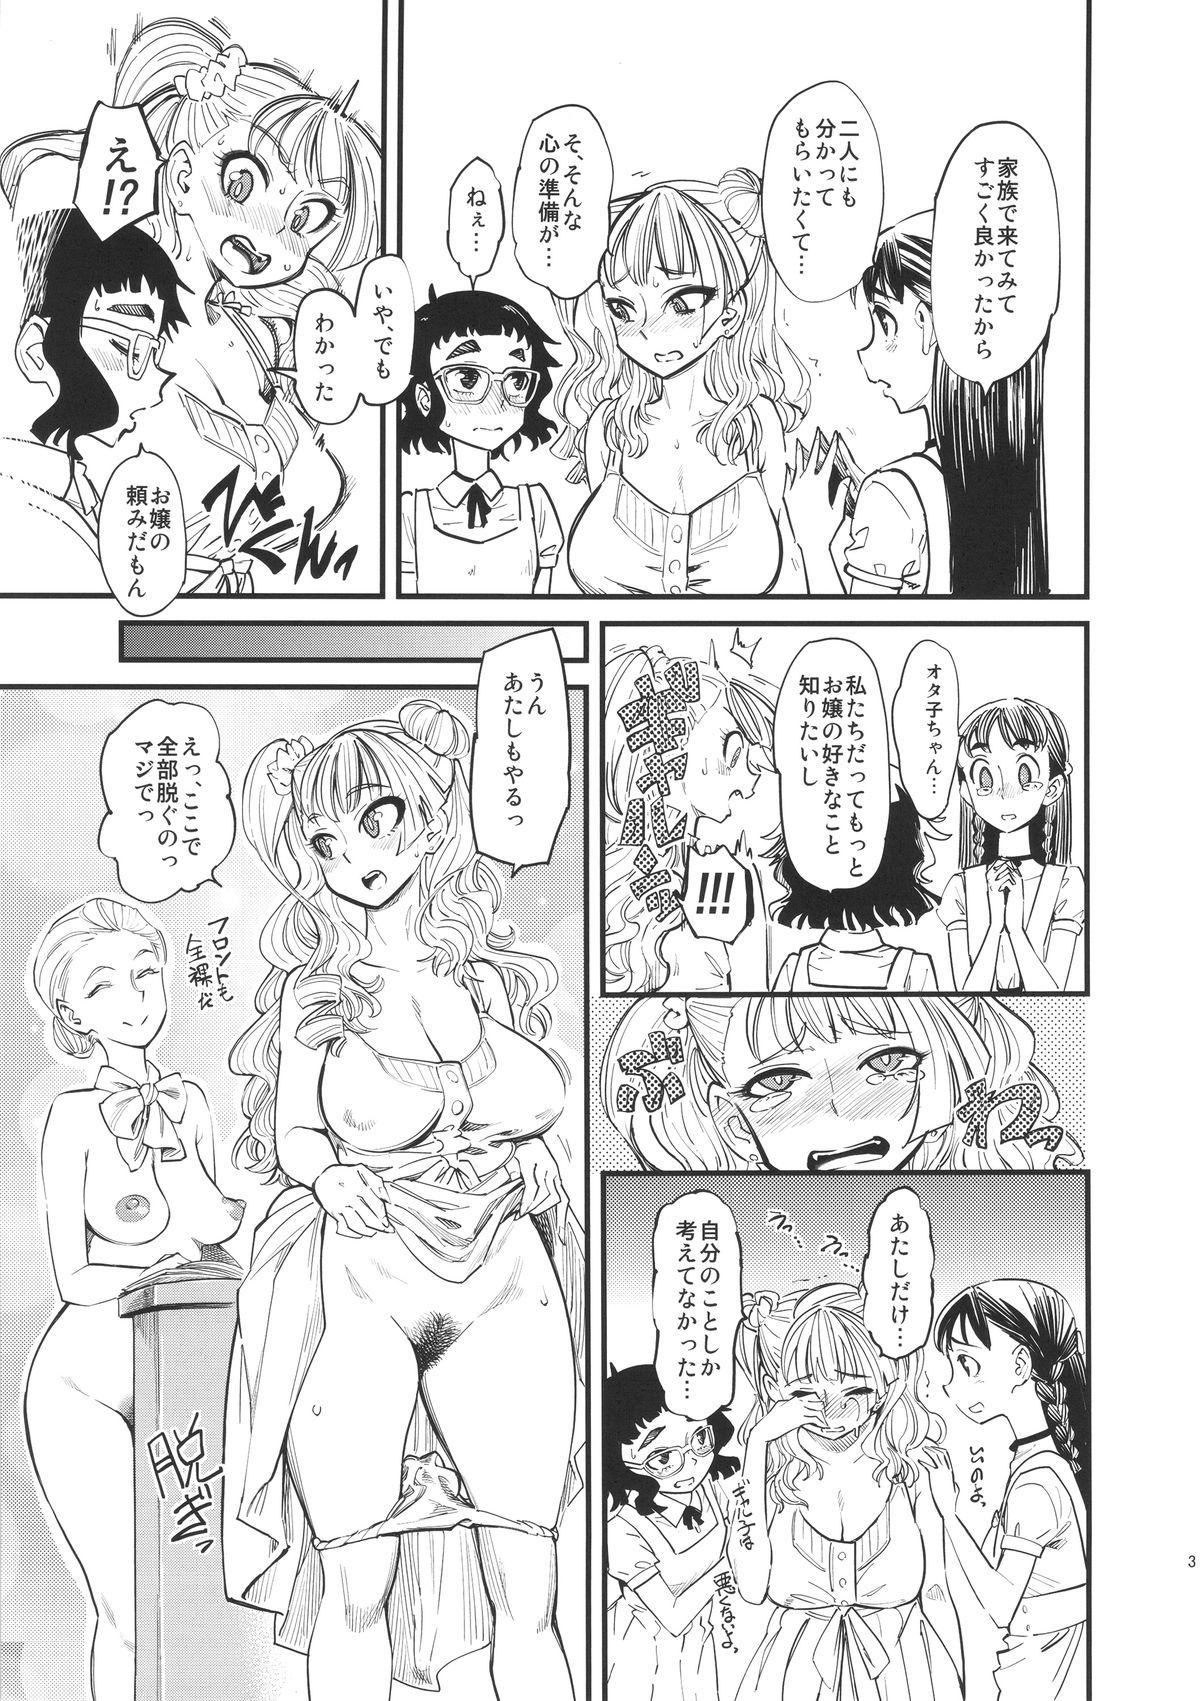 Boobies NMB - Oshiete galko-chan Gay Theresome - Page 4